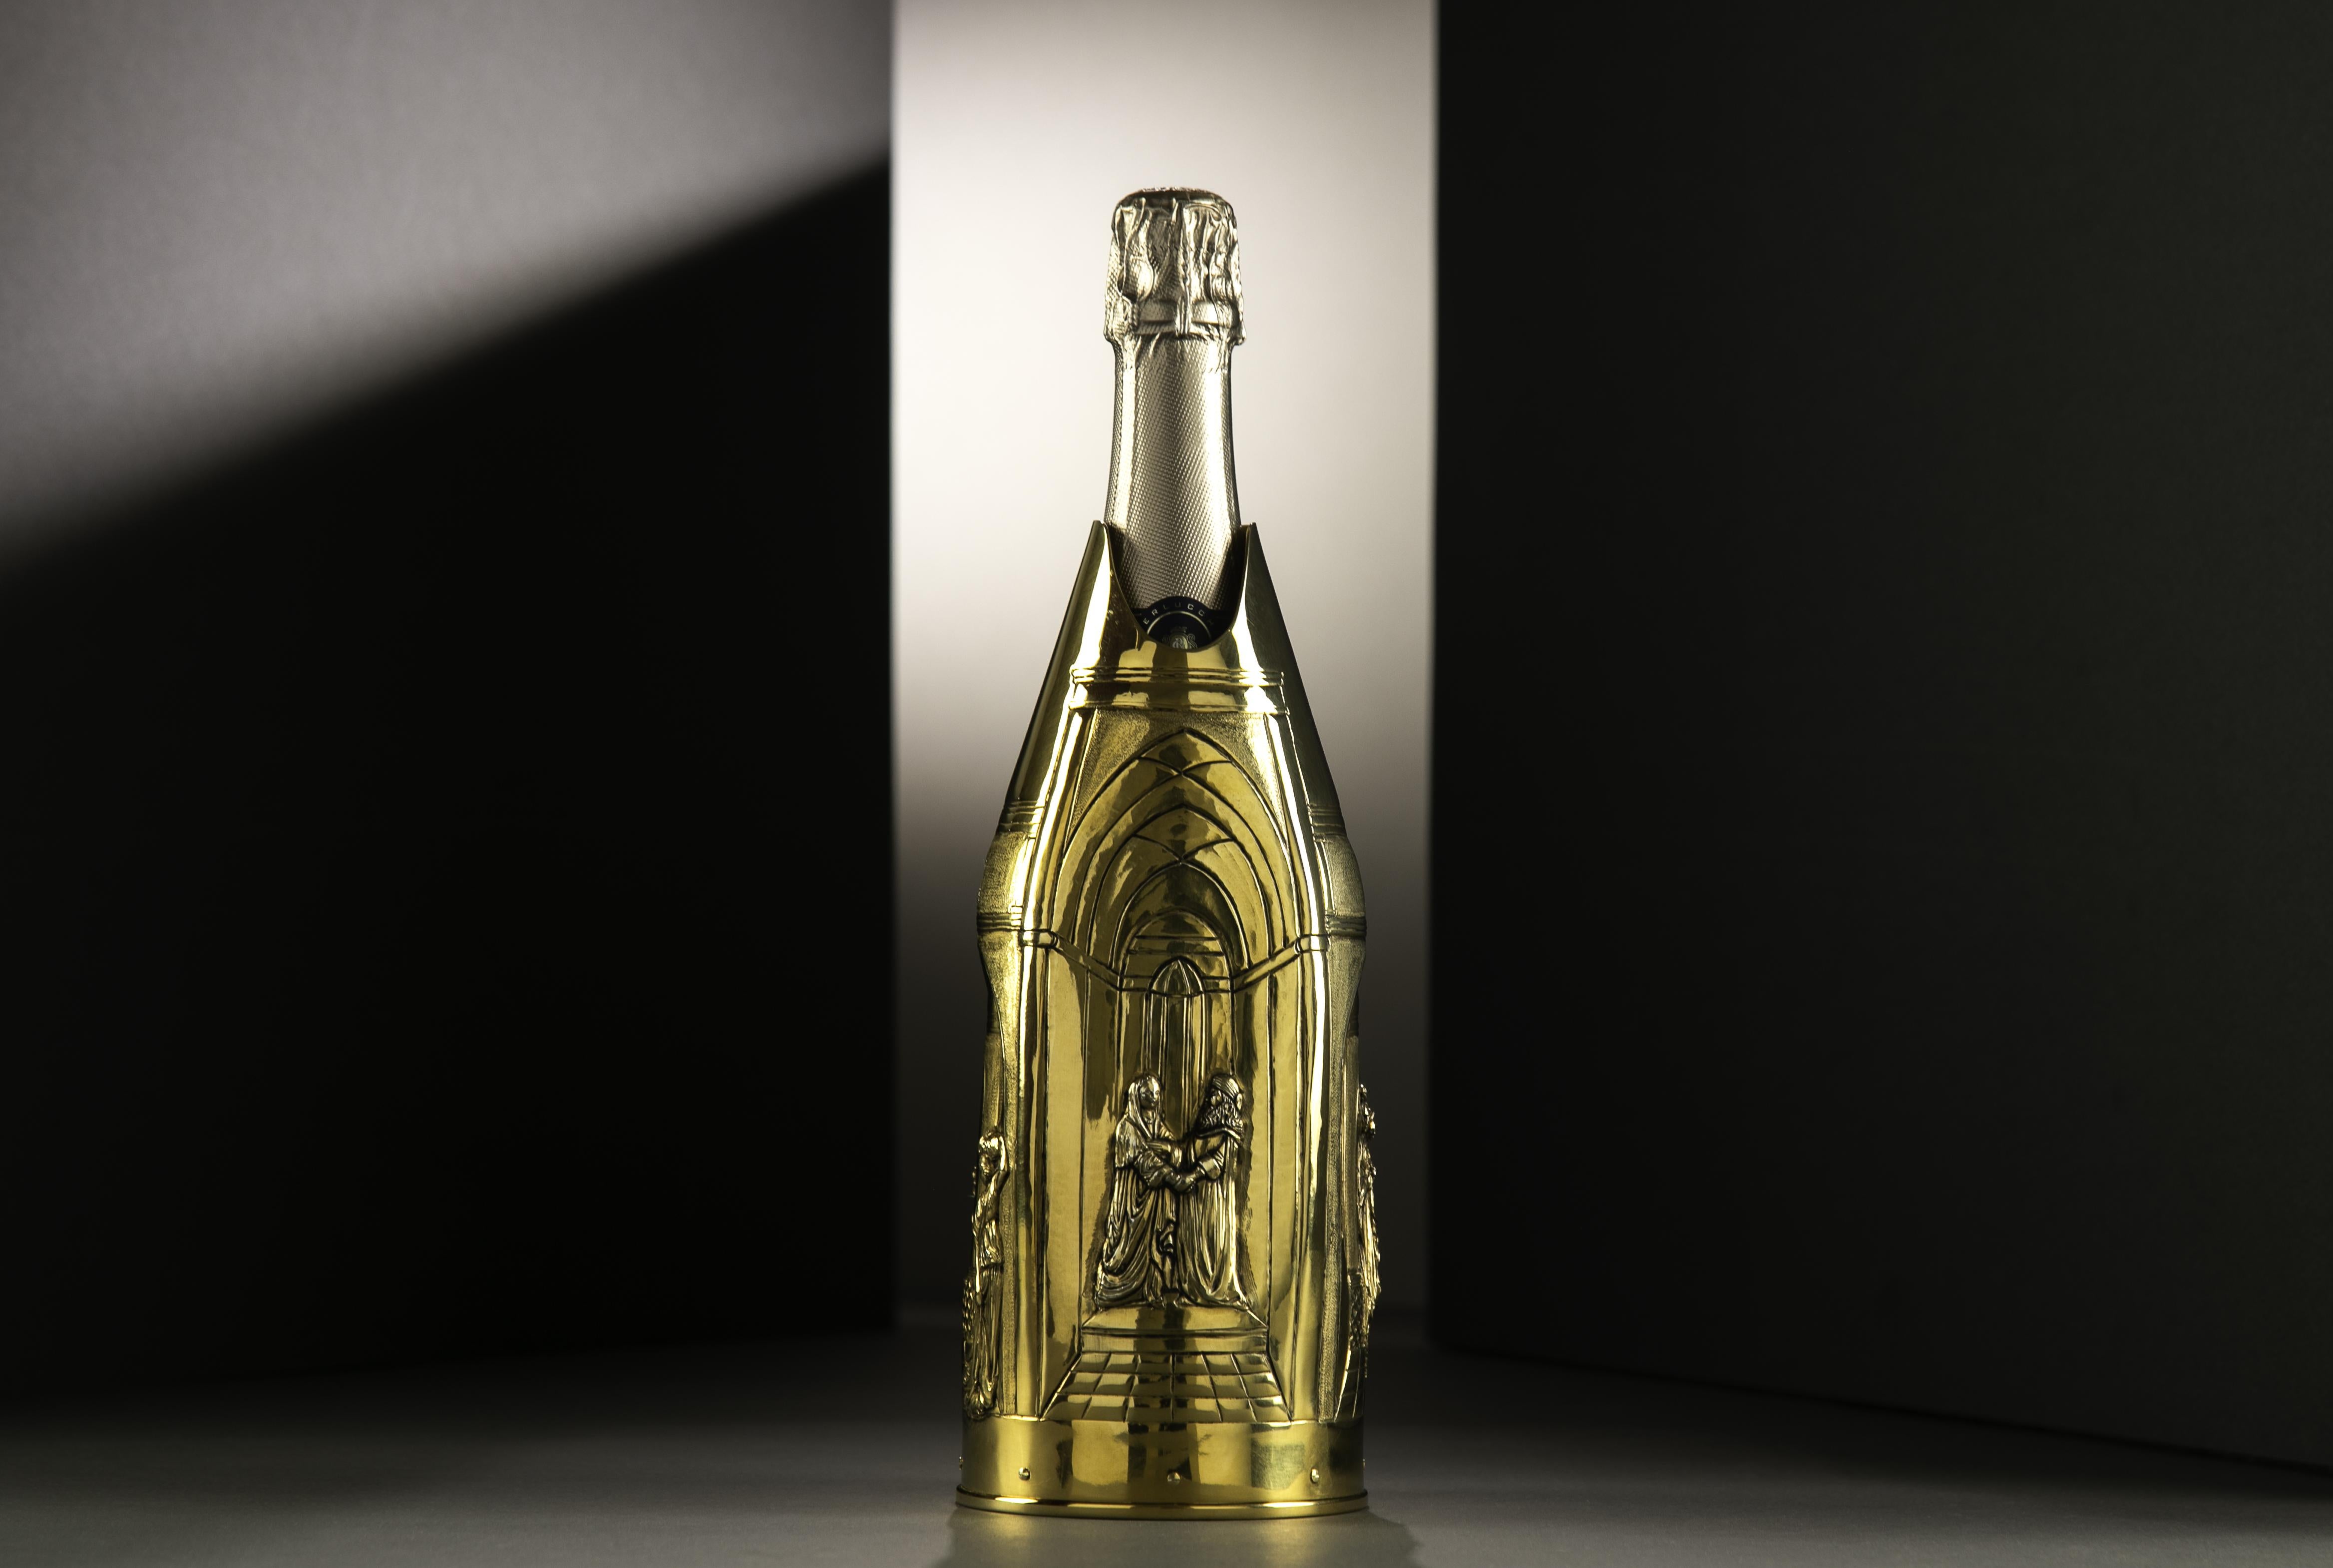 Introducing a unique champagne K-OVER from our Work of Art collection. Hand-chiseled, engraved, and gold-plated by Lorenzo Foglia, our celebrated artist. This is a special one of a kind piece.

Inspired by the renowned Gates of Paradise, Ghiberti’s